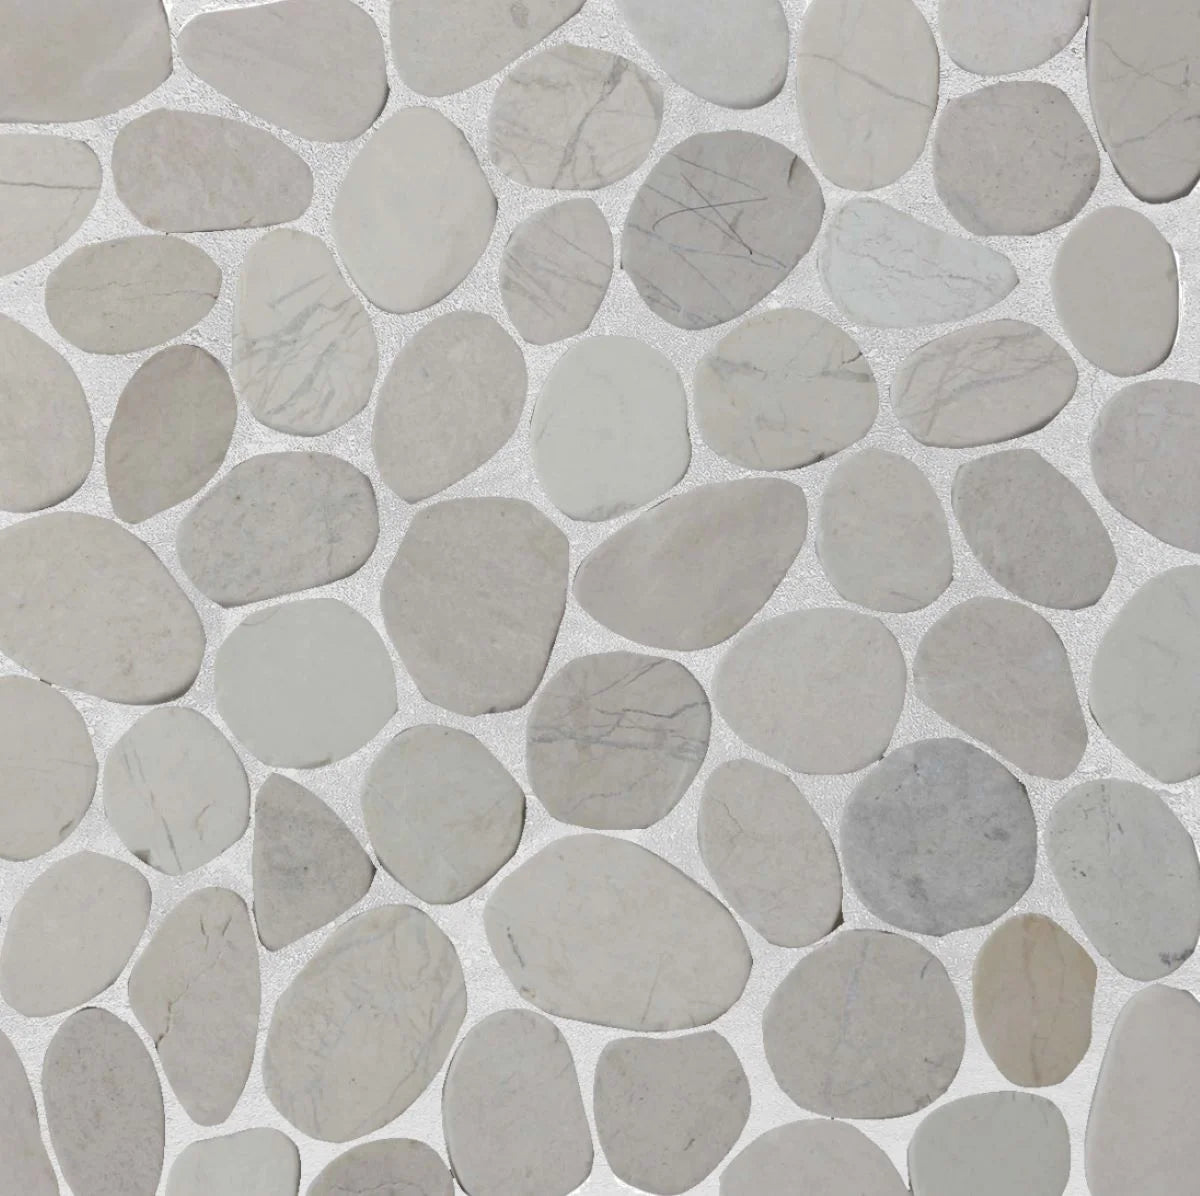 tan sliced pebble tile sample with grout